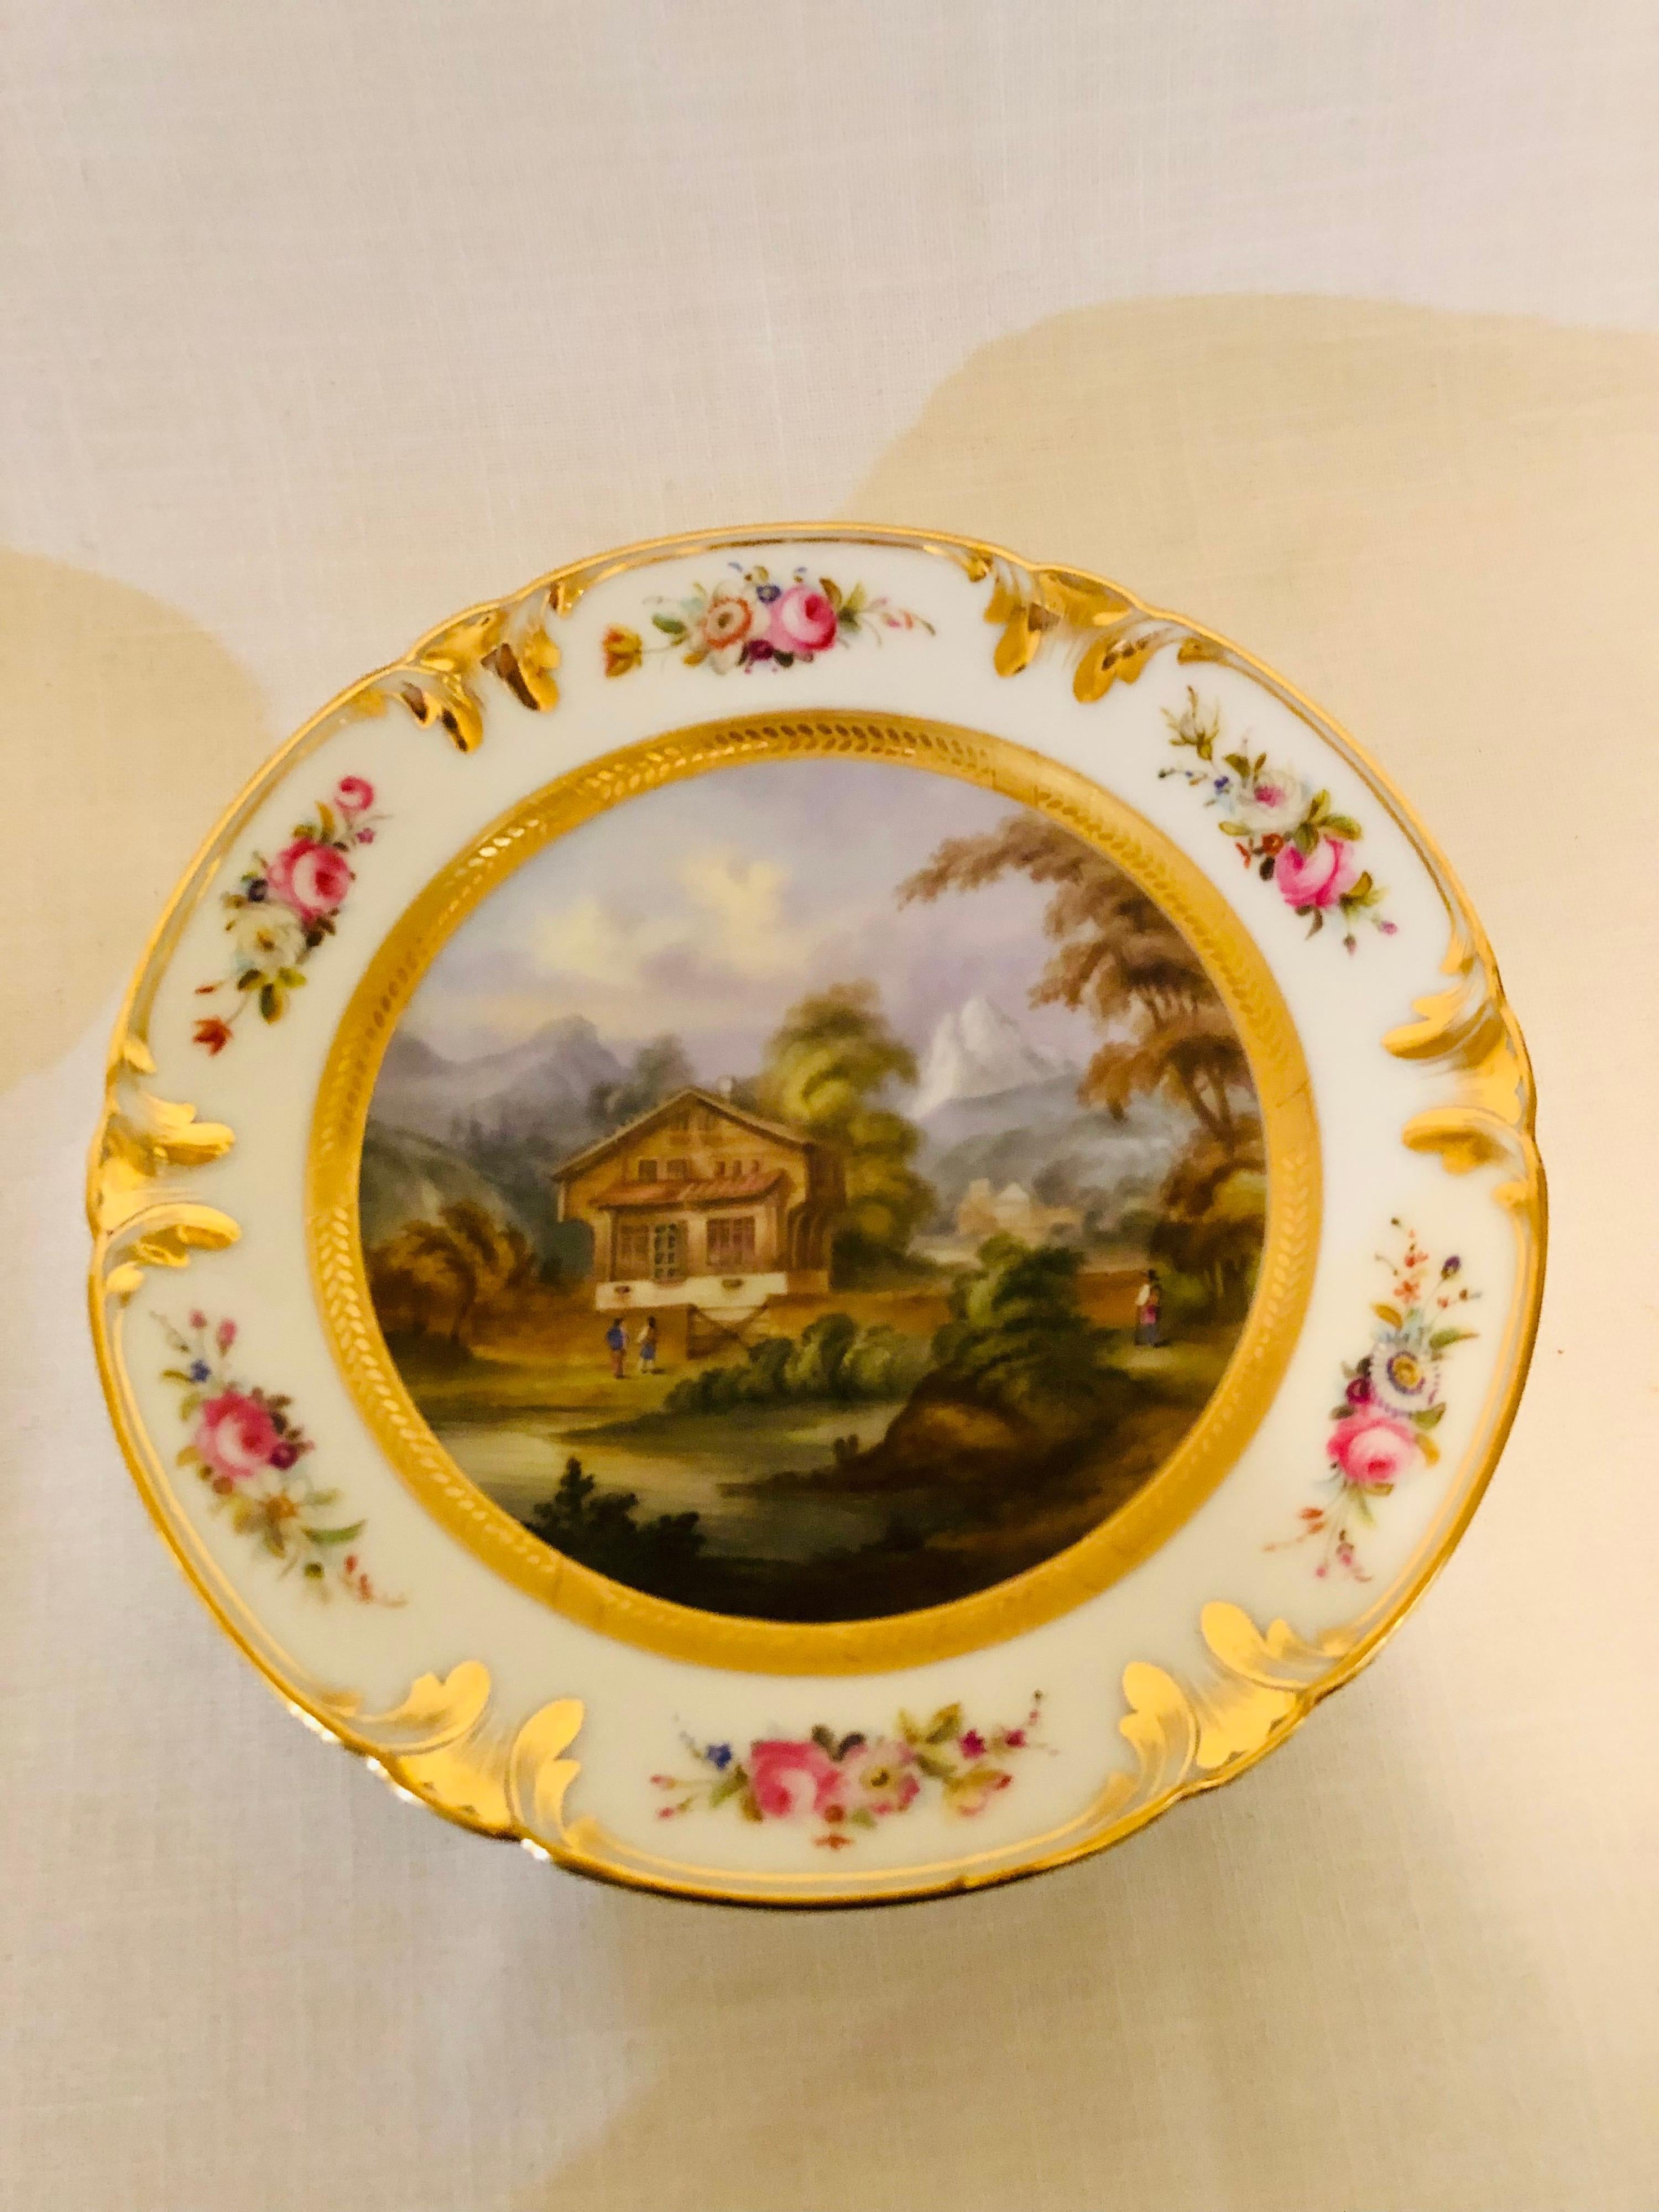 Other Set of Old Paris Porcelain Plates Each Painted with Different Decorative Scenes For Sale